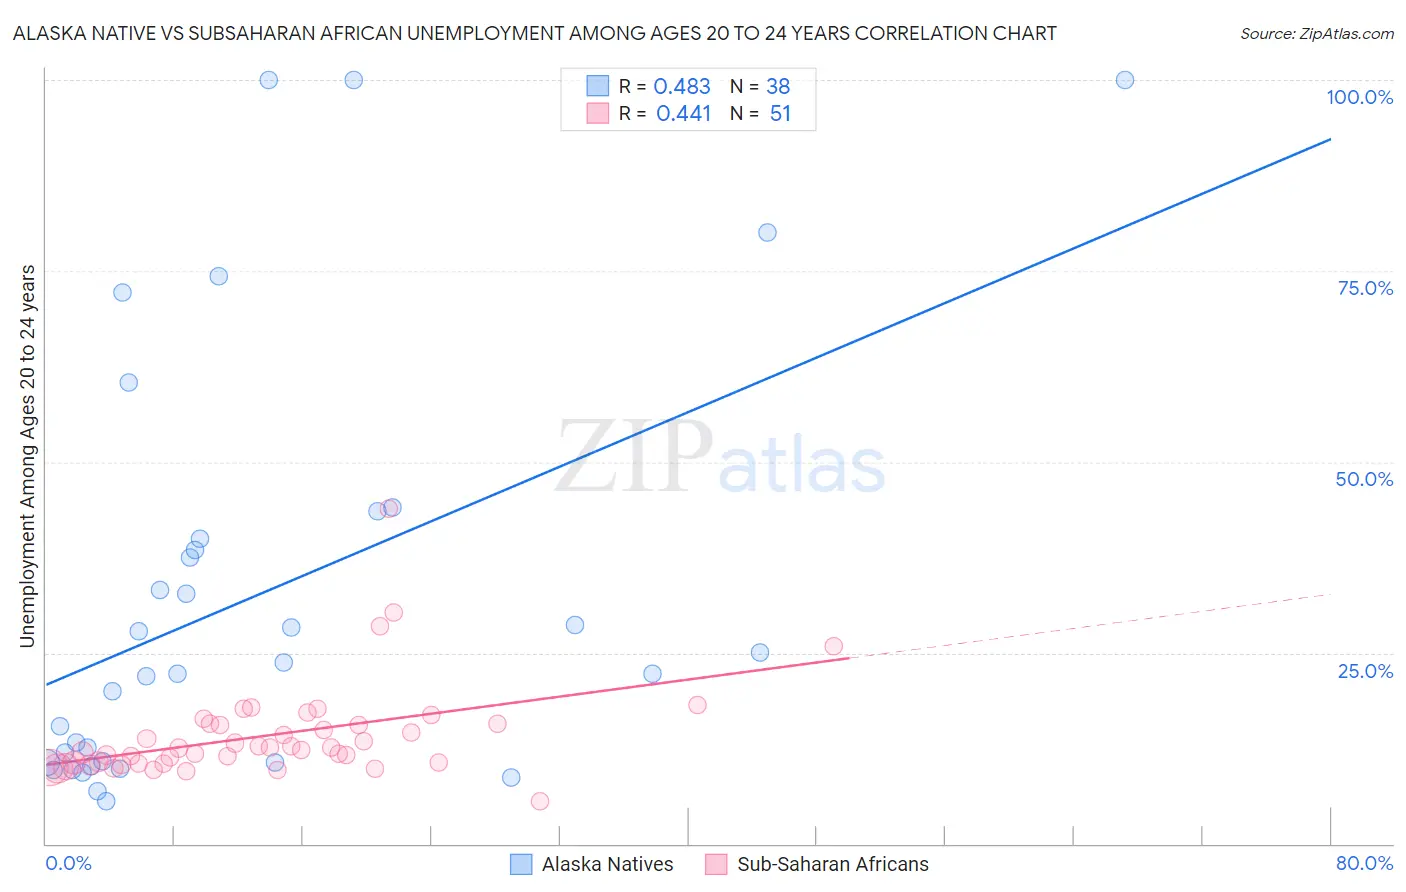 Alaska Native vs Subsaharan African Unemployment Among Ages 20 to 24 years